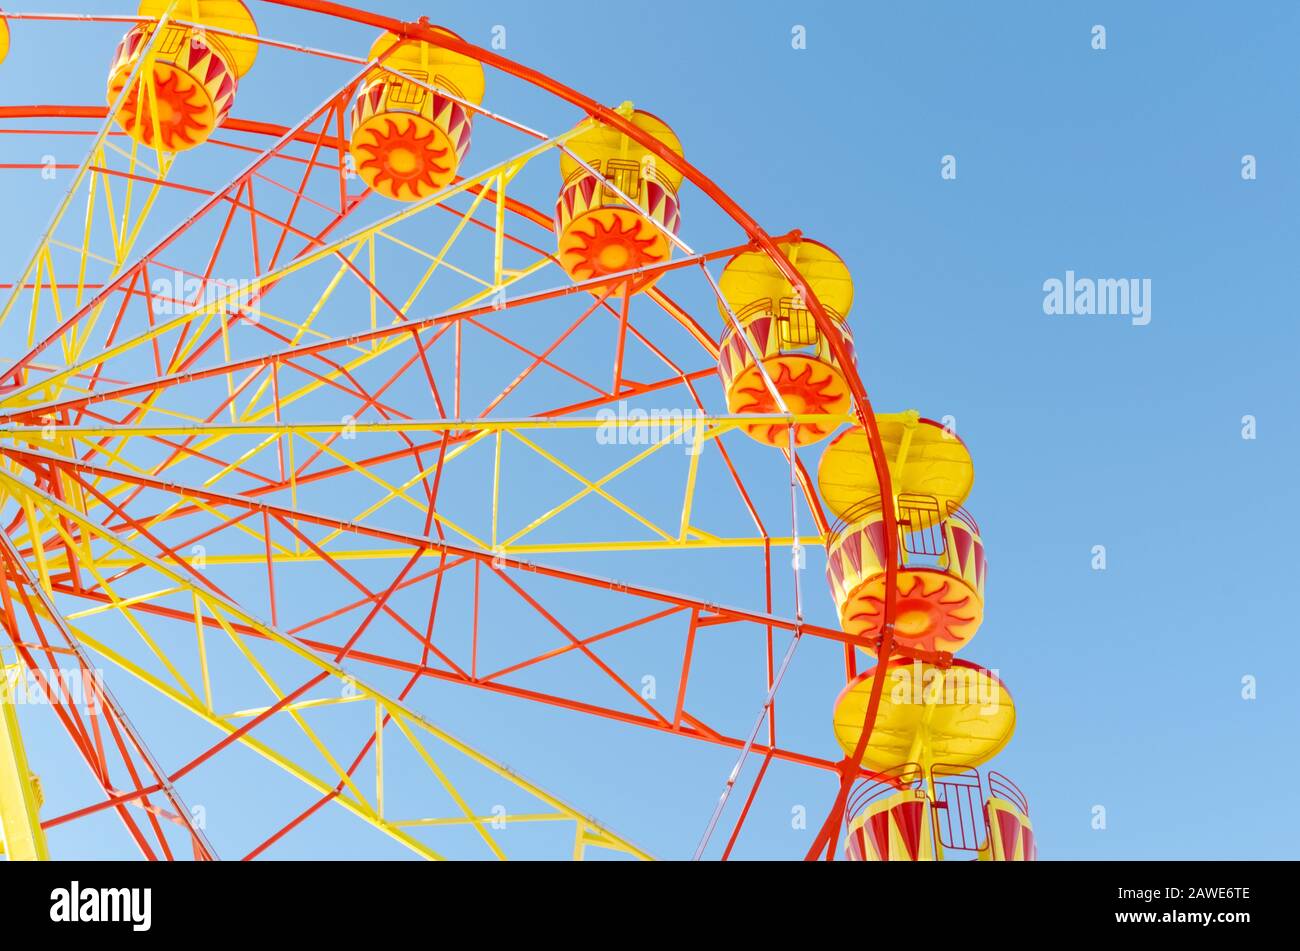 Ferris wheel on a background of blue clear sky. Stock Photo